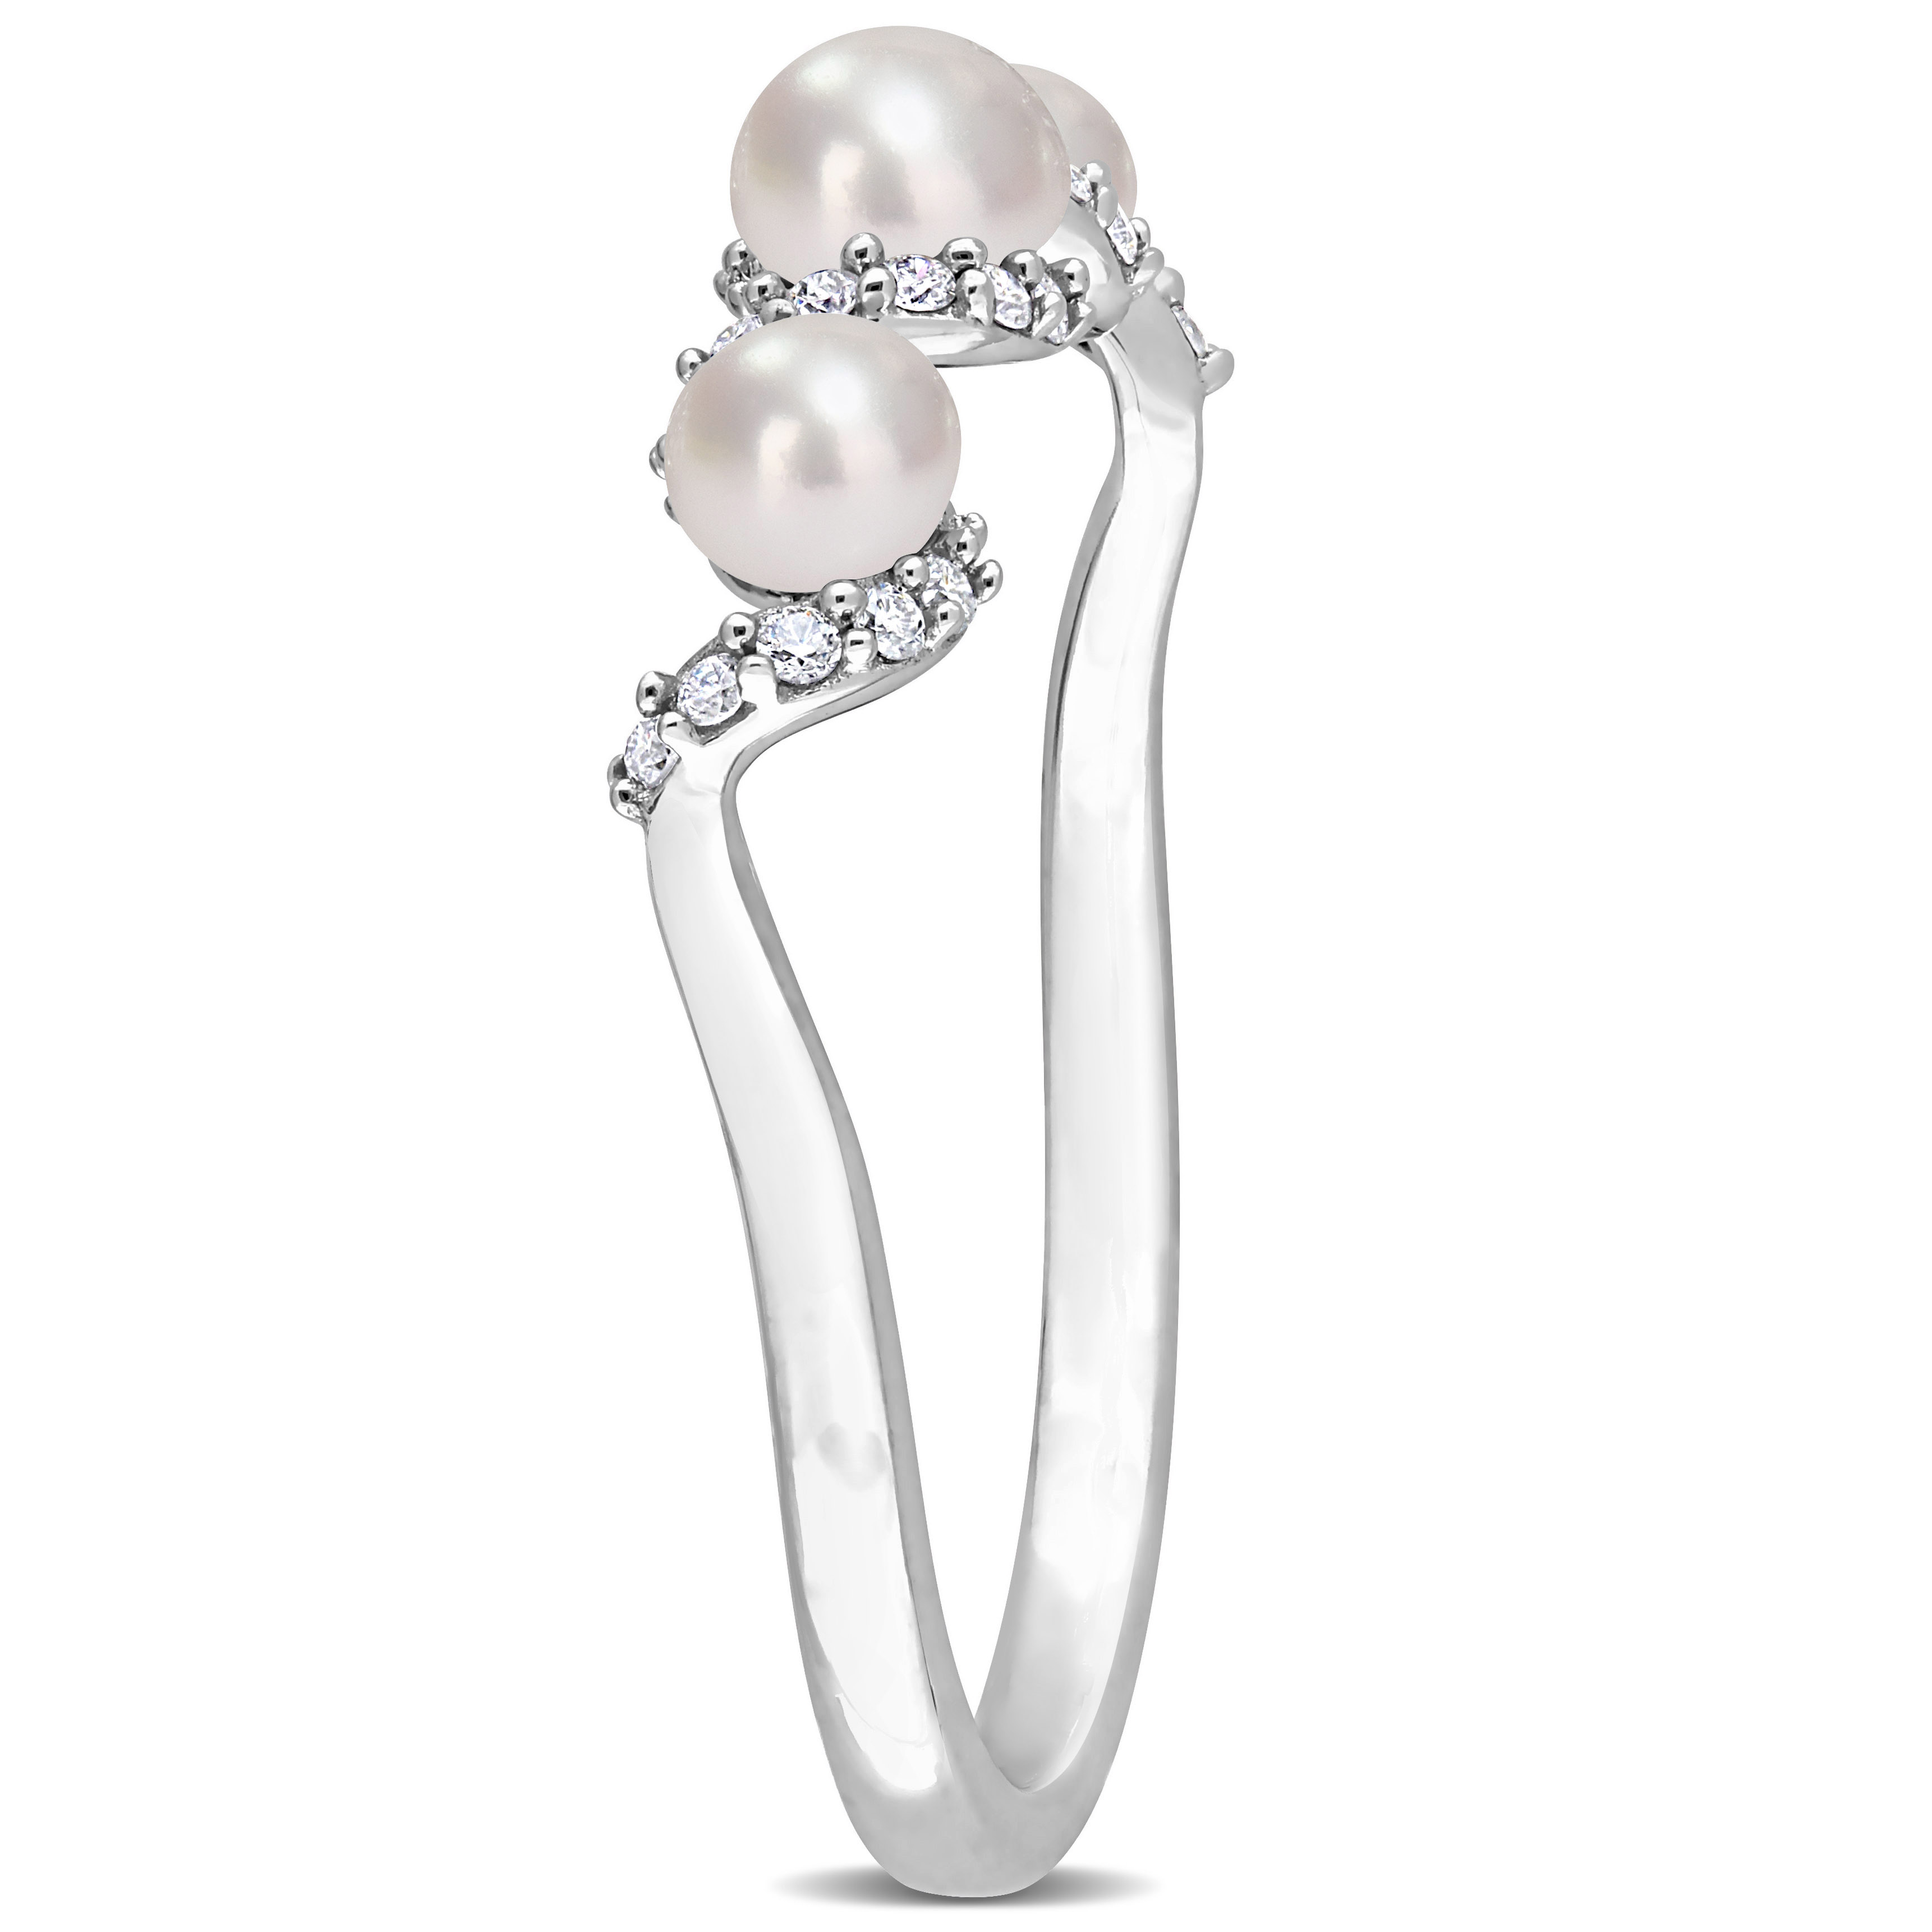 Cultured Freshwater Pearl and 1/10 CT TDW Diamond Swirl Ring in 14k White Gold